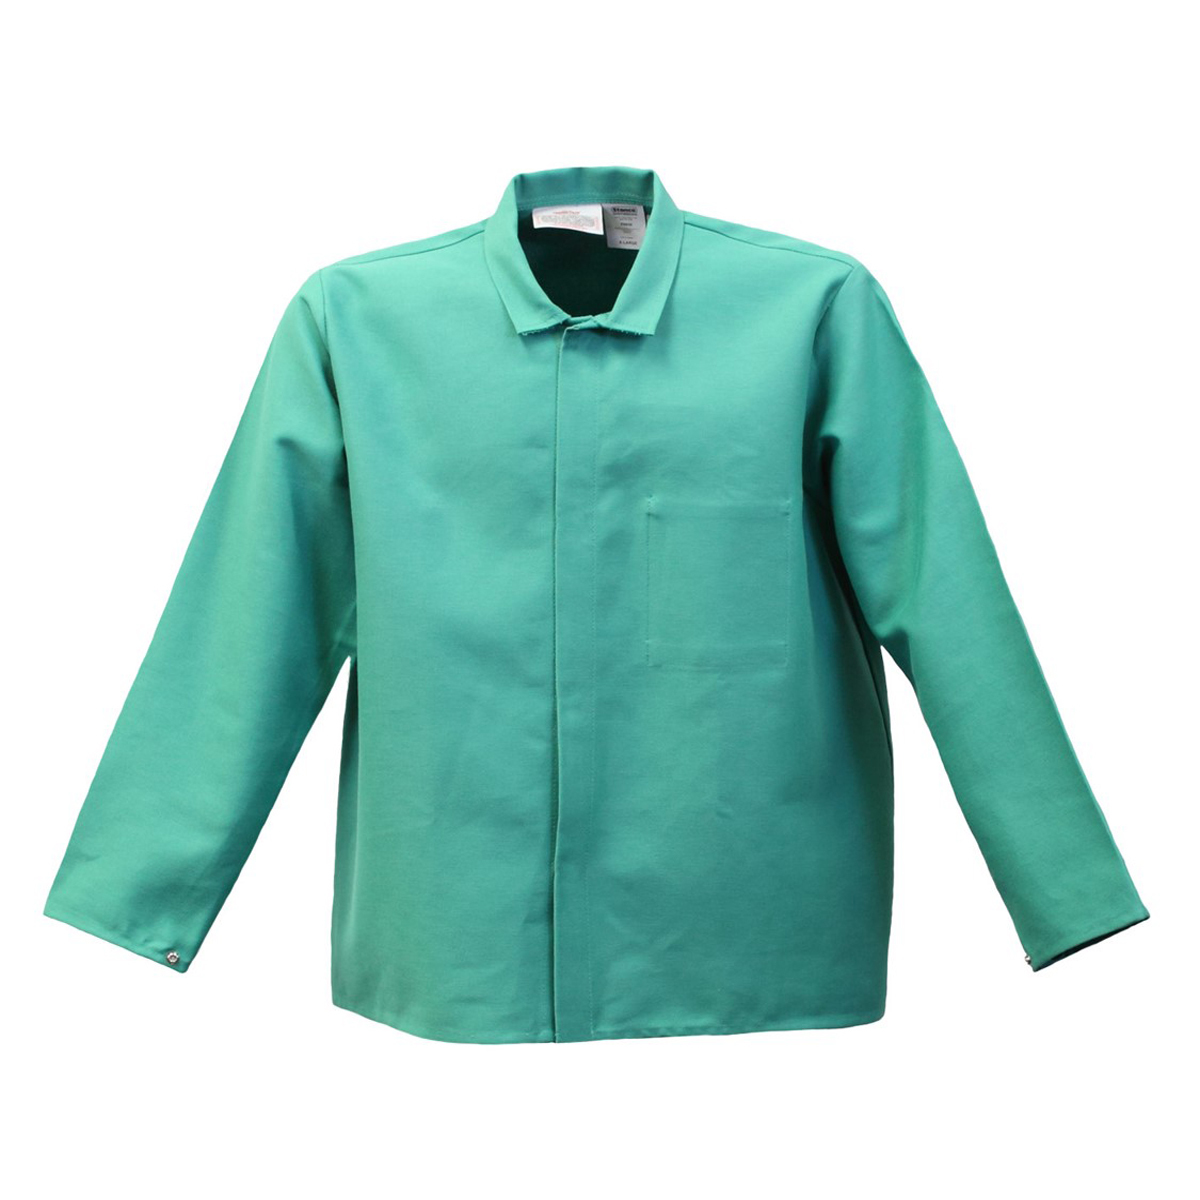 Stanco Safety Products™ X-Large Green Cotton Flame Resistant Welding Jacket With Hook And Loop Closure And 2